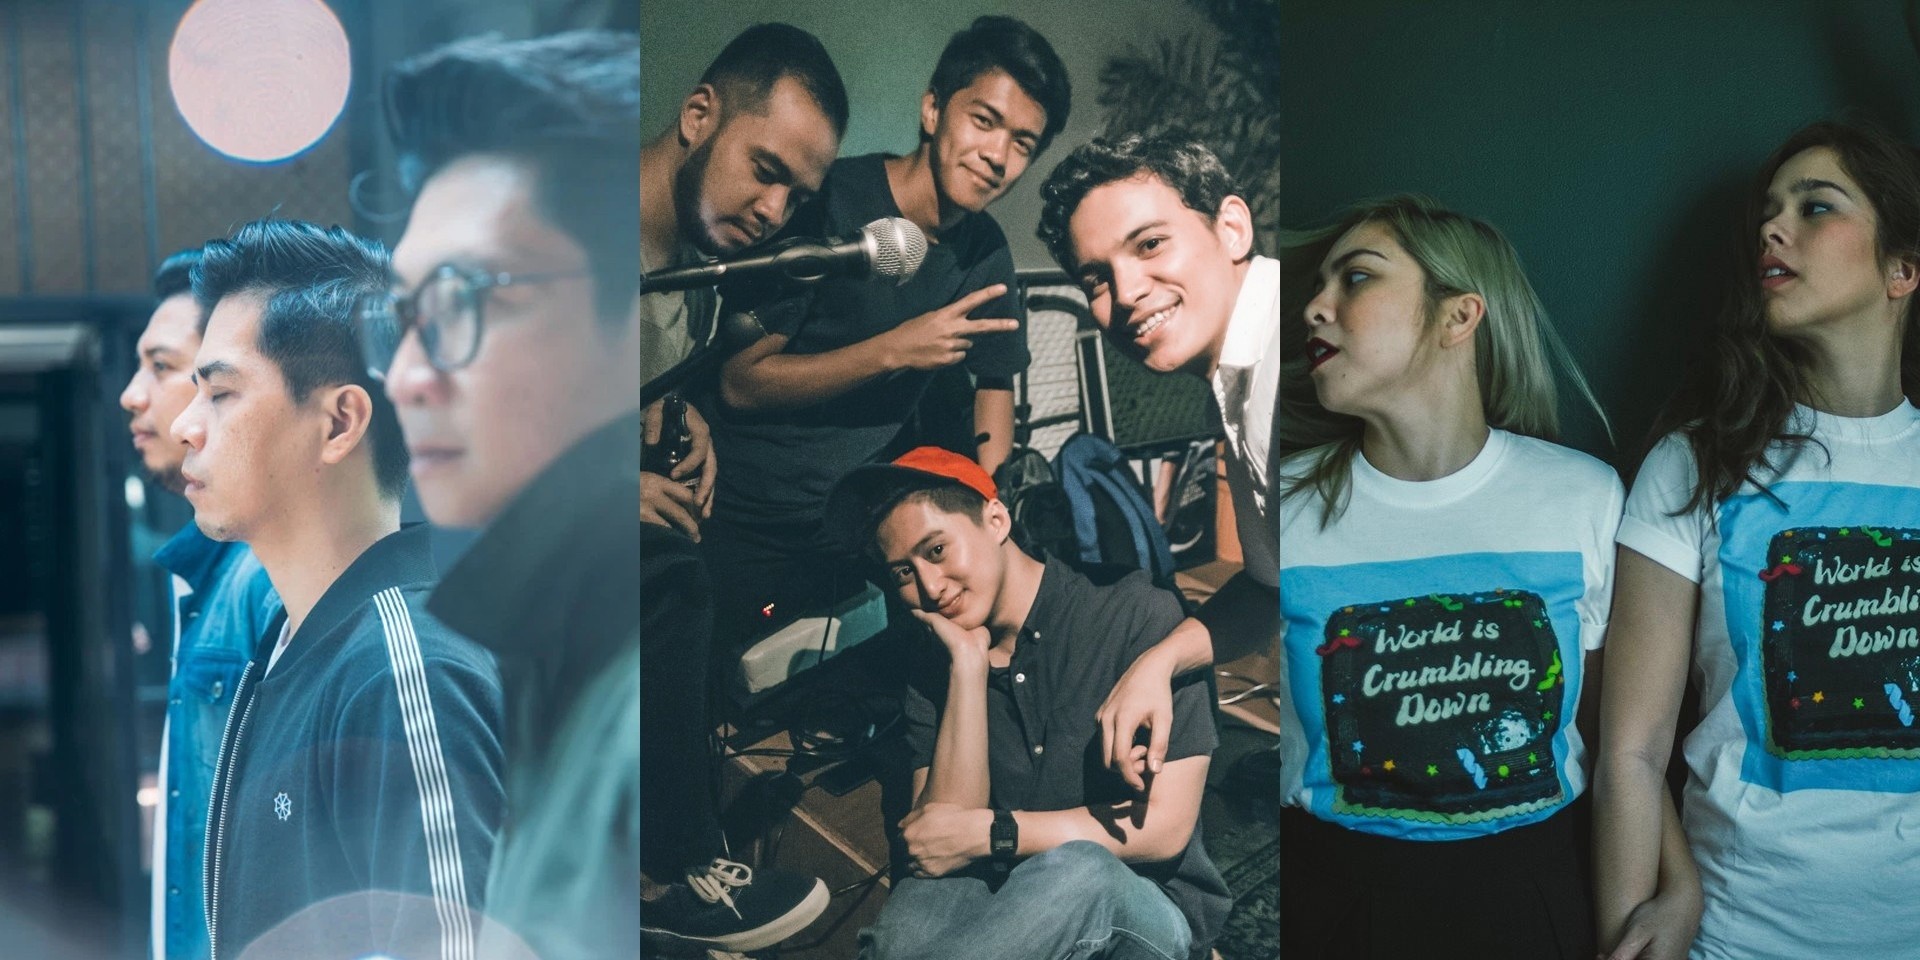 Orange & Lemons, Rusty Machines, Cheats and more to perform at Free the Sea Movement 3 in La Union